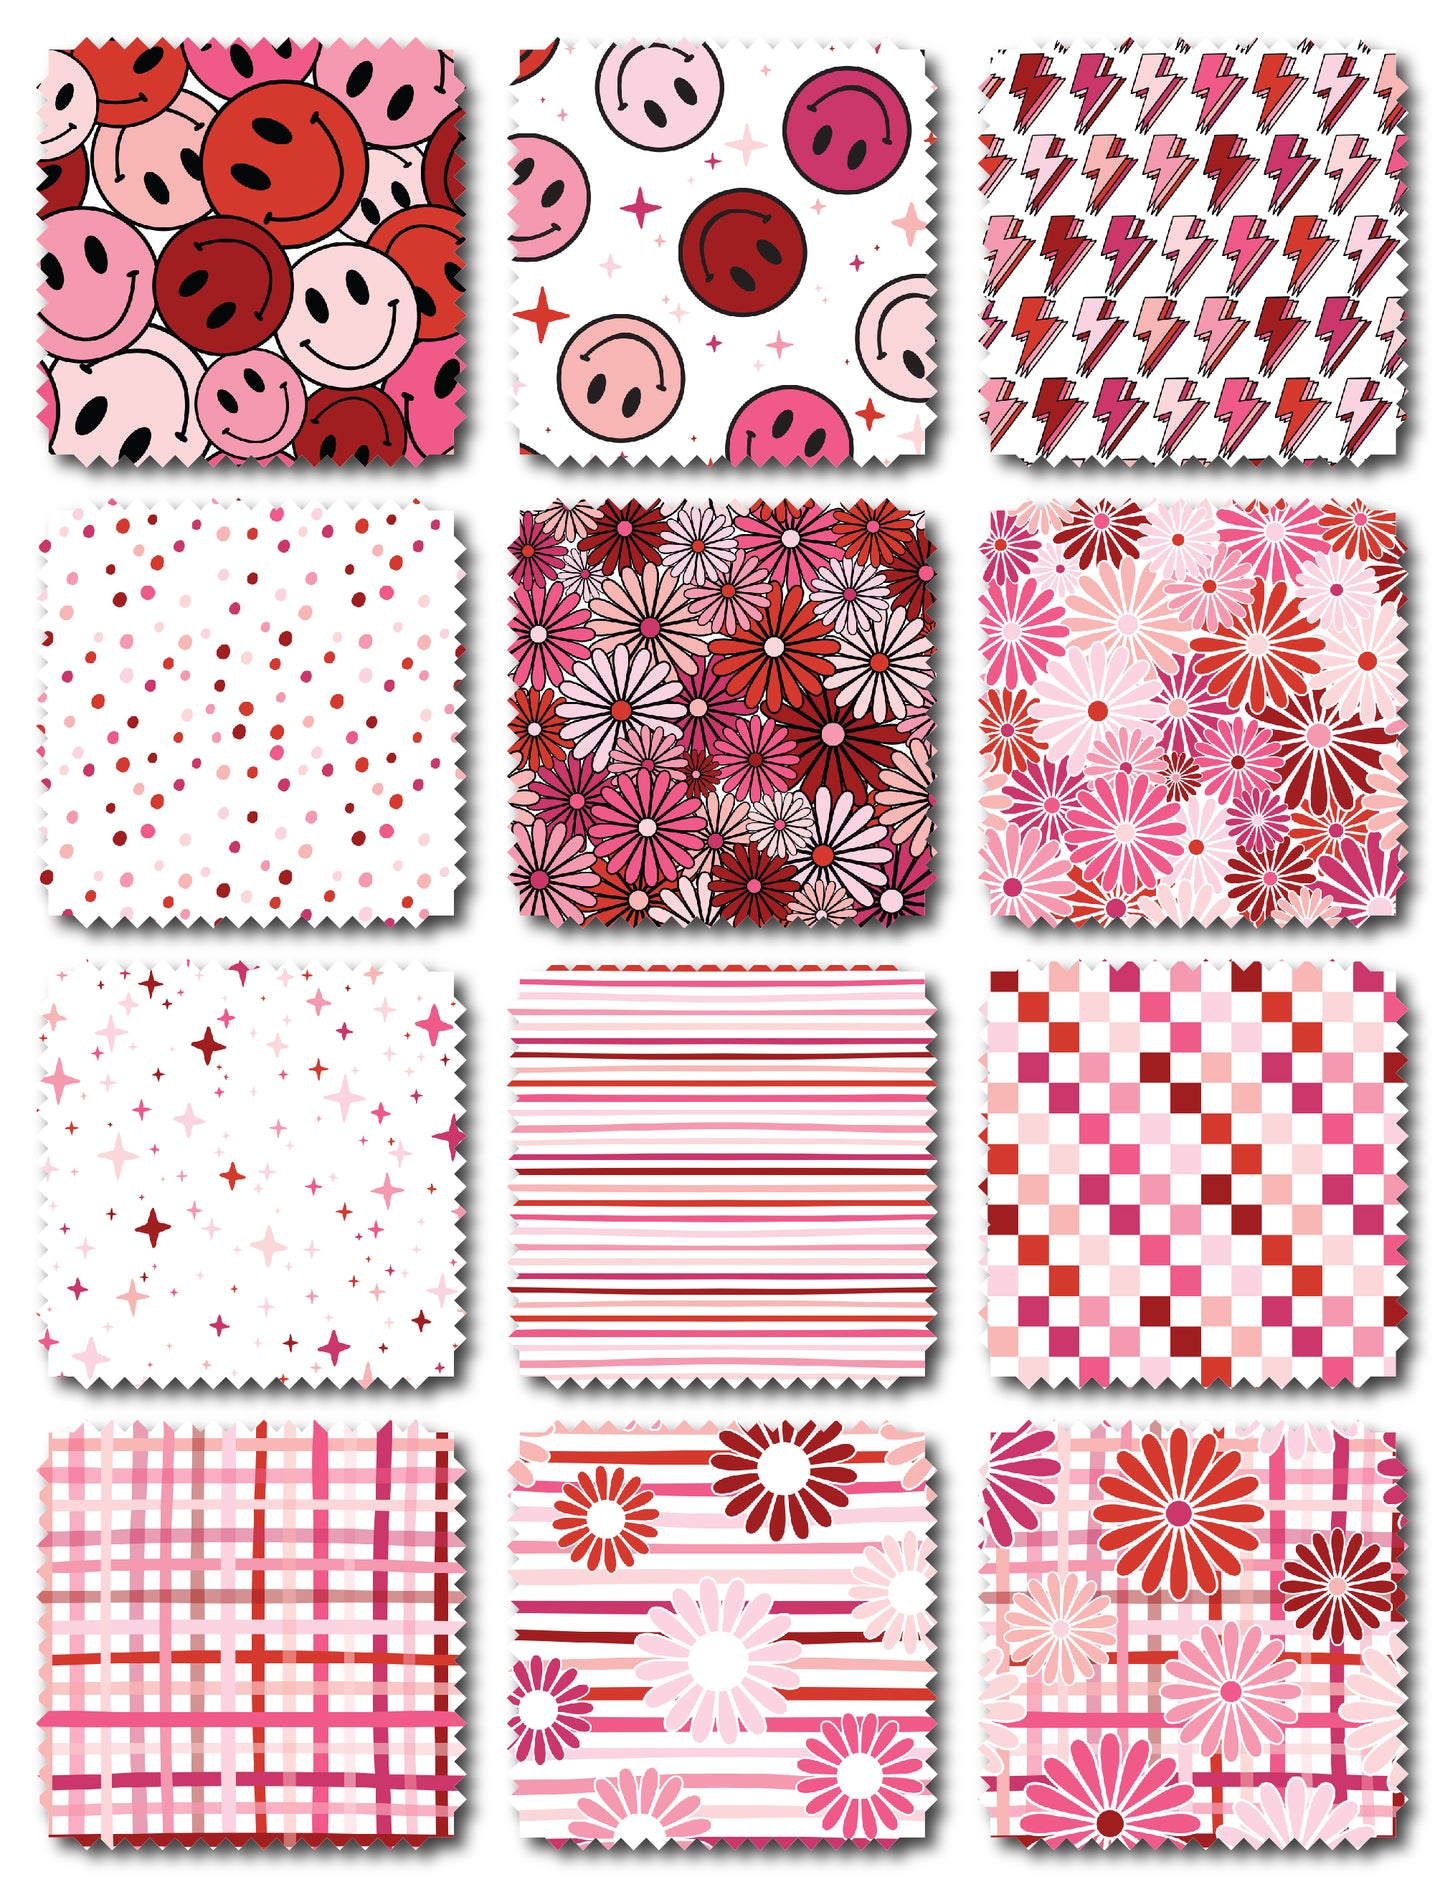 Valentine's Day Digital Papers